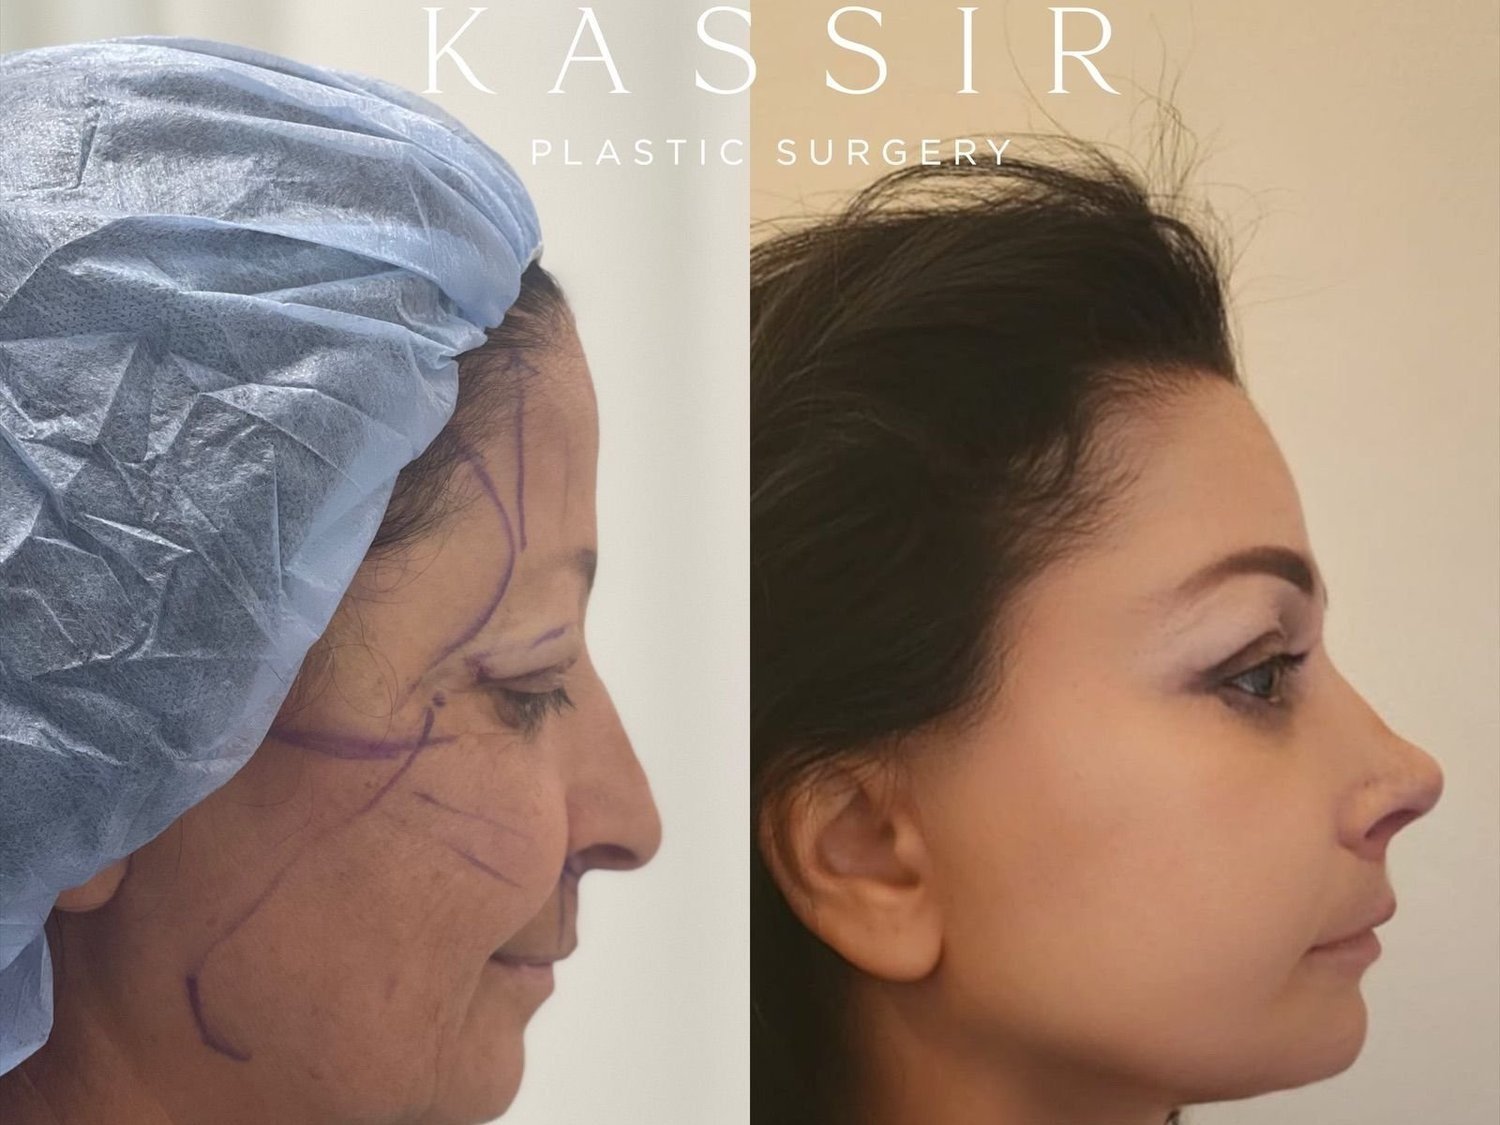 Facelift with rhinoplasty before and after